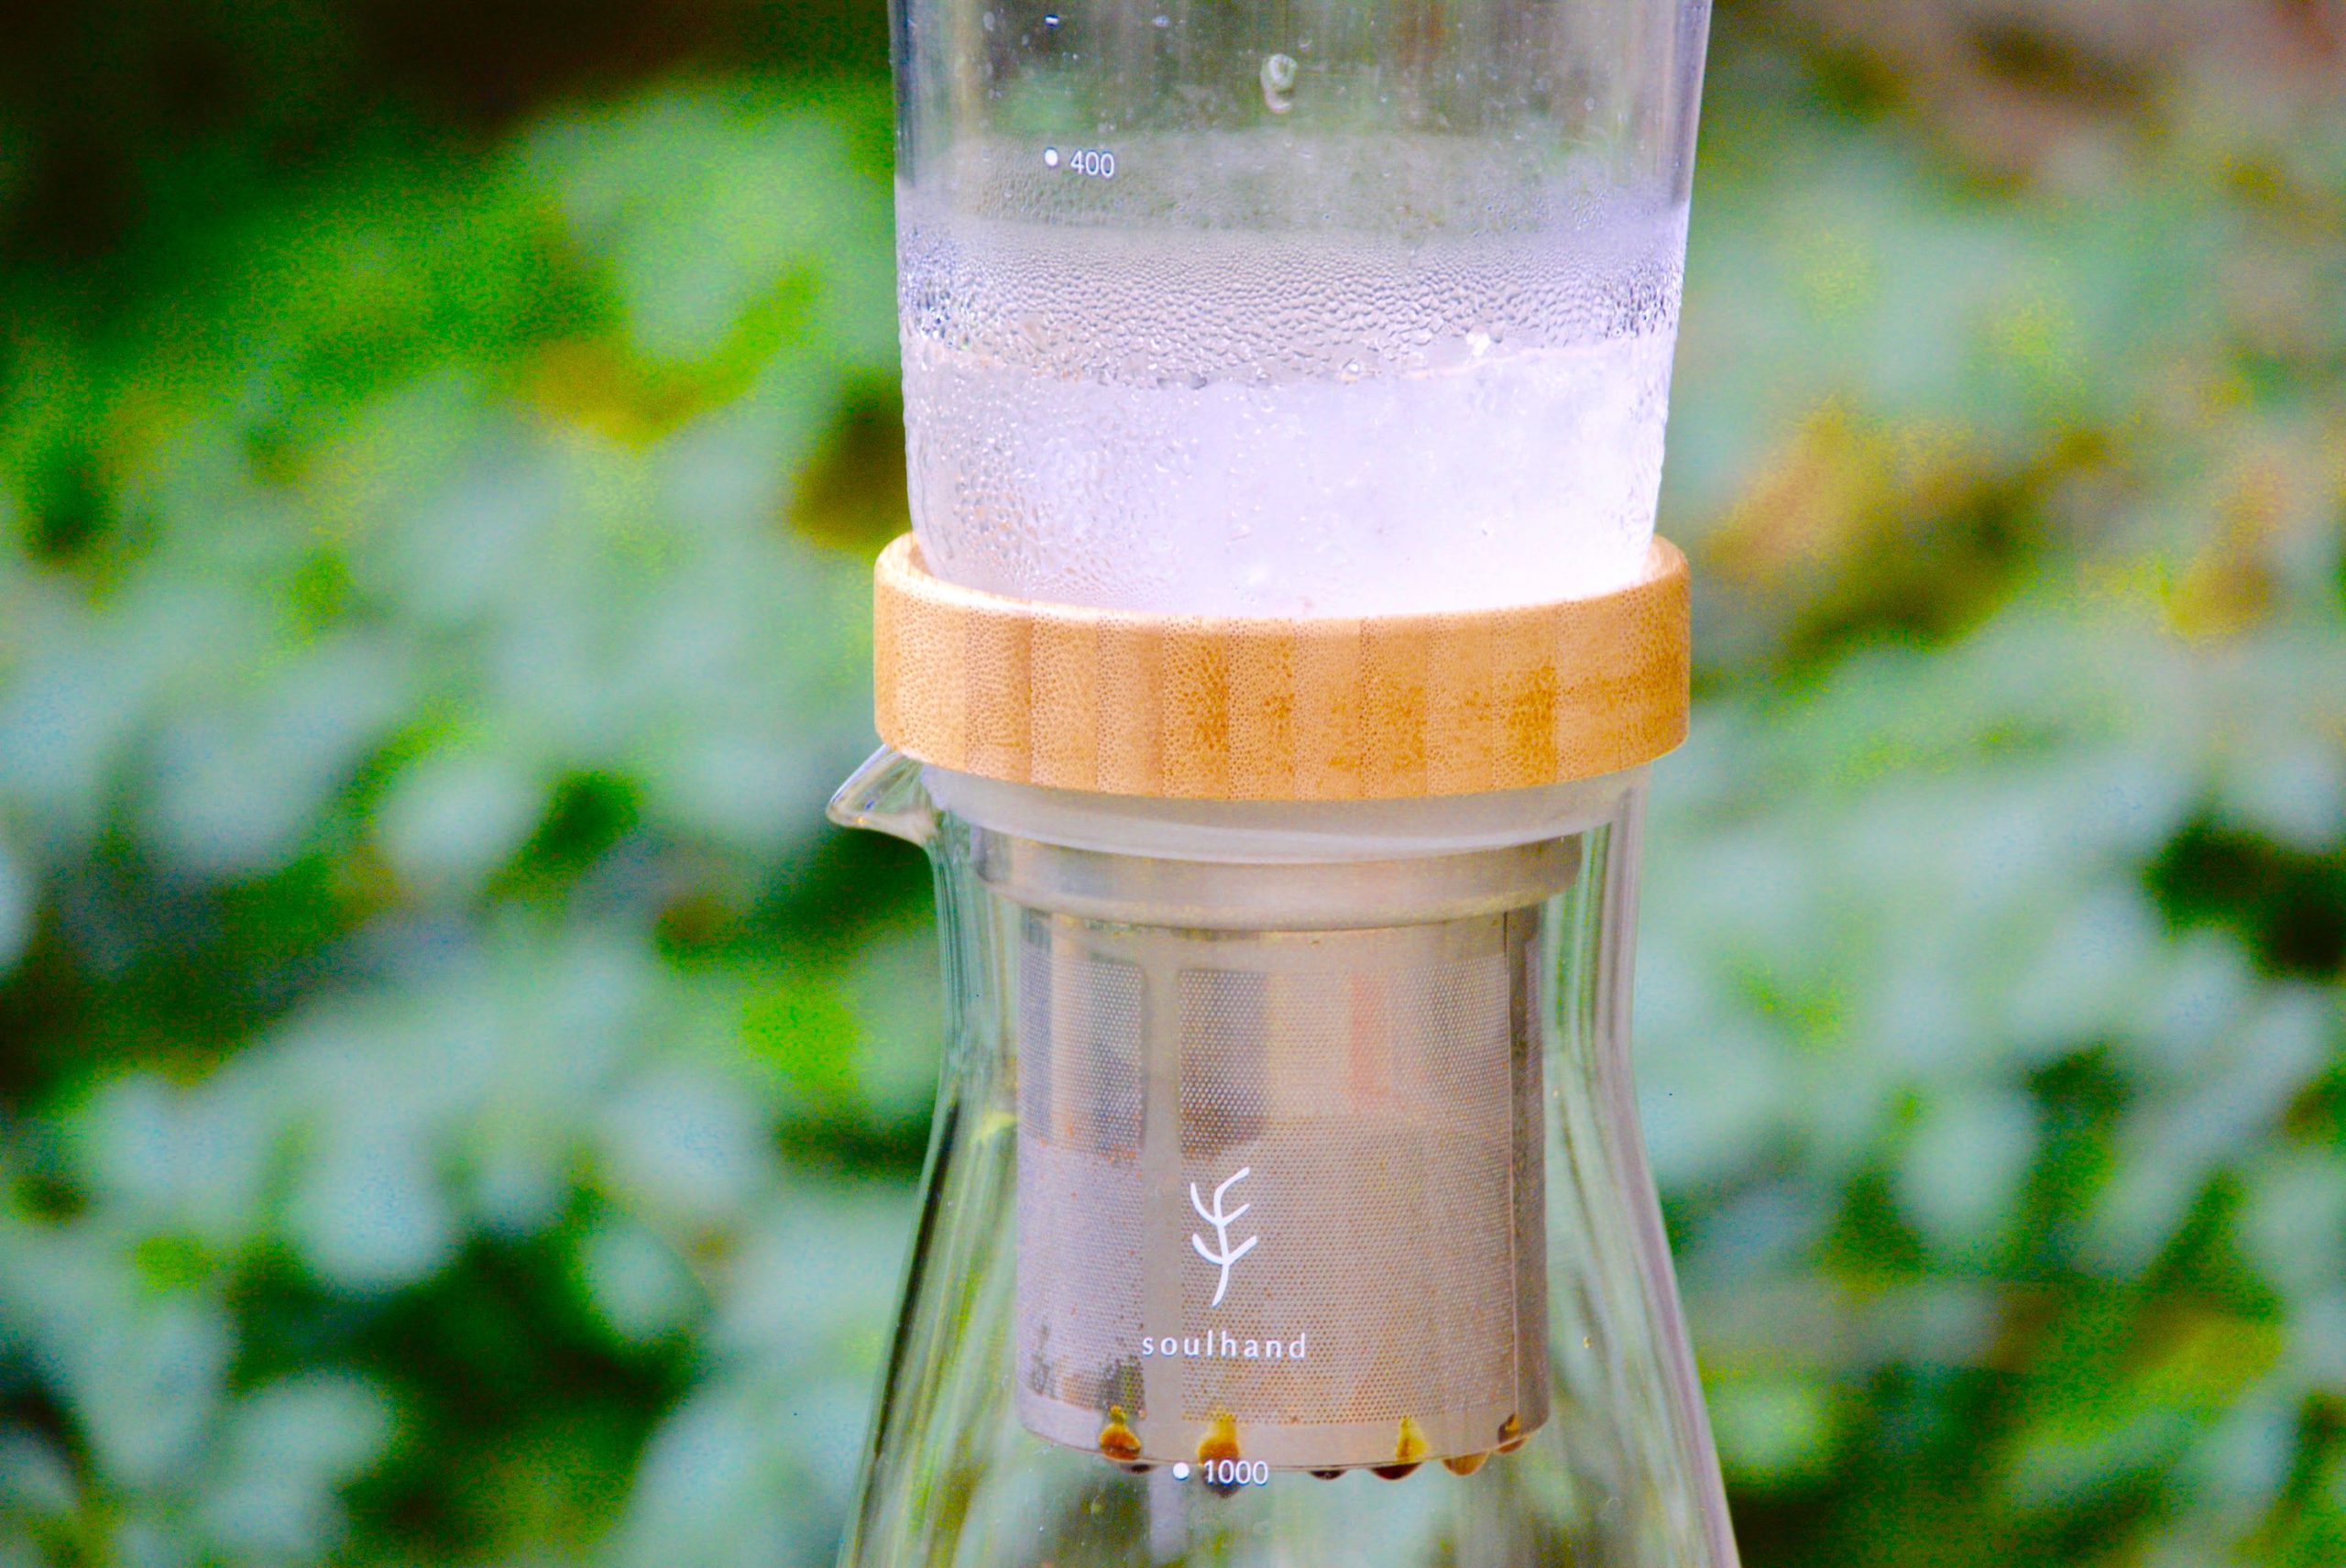 Hario Filter-In Bottle for Cold Brew Tea - The Steeping Room